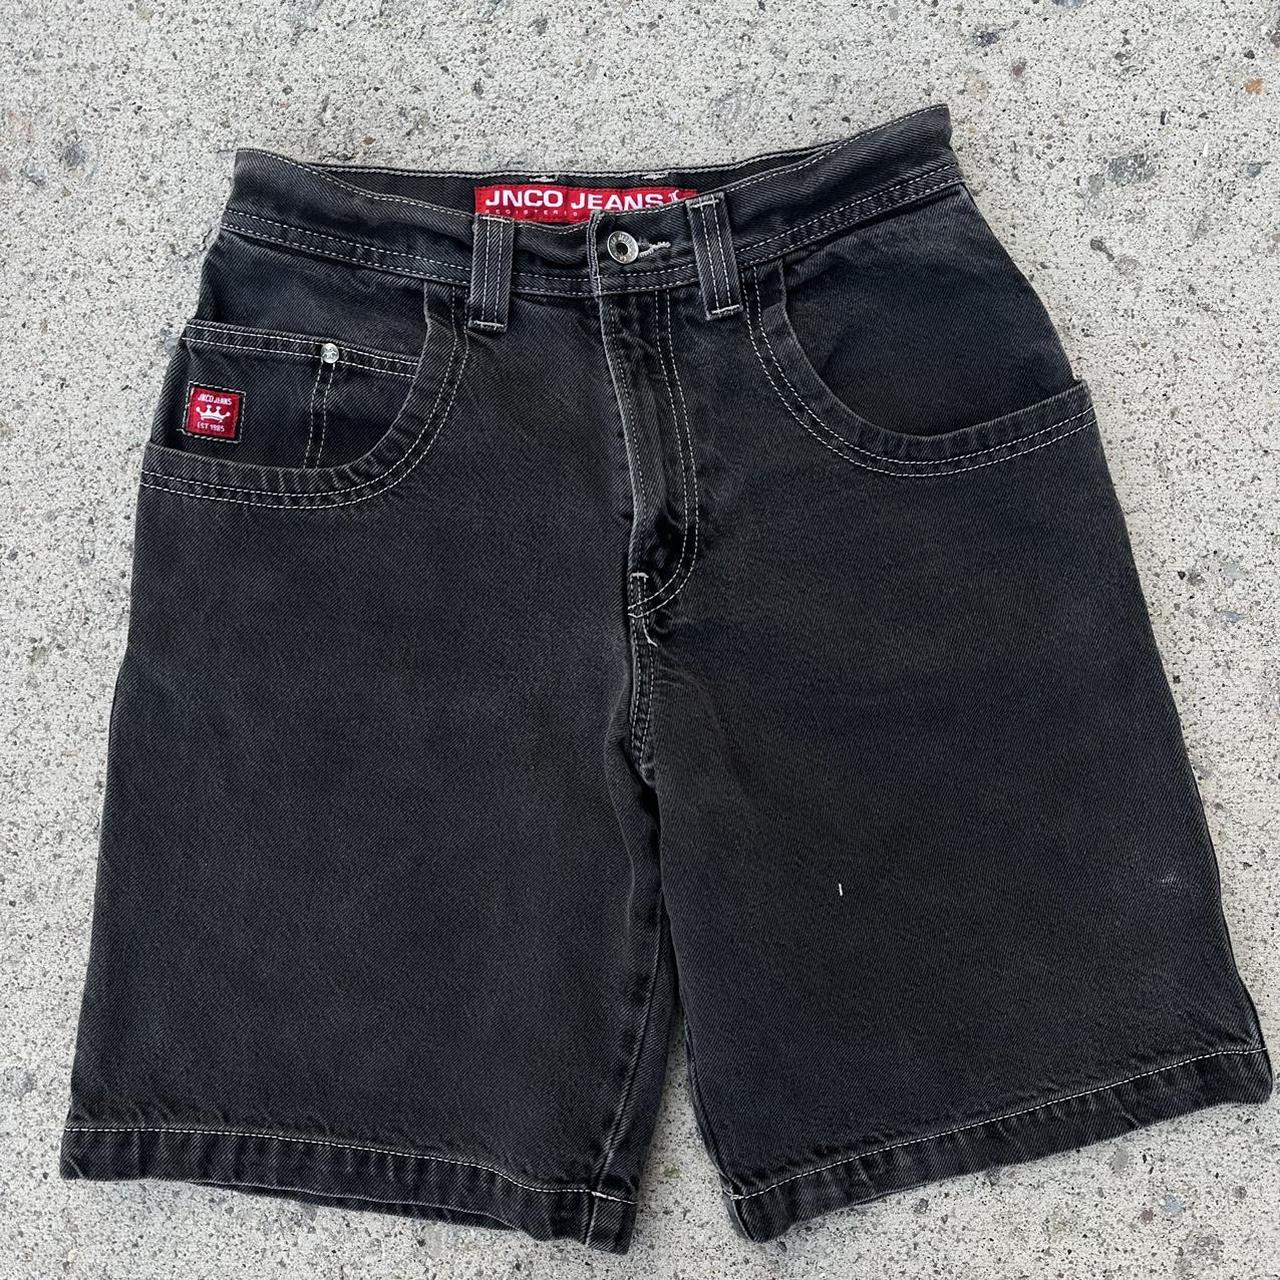 Insane 90s Grail JNCO Panther Shorts Size: 16/28... - Depop